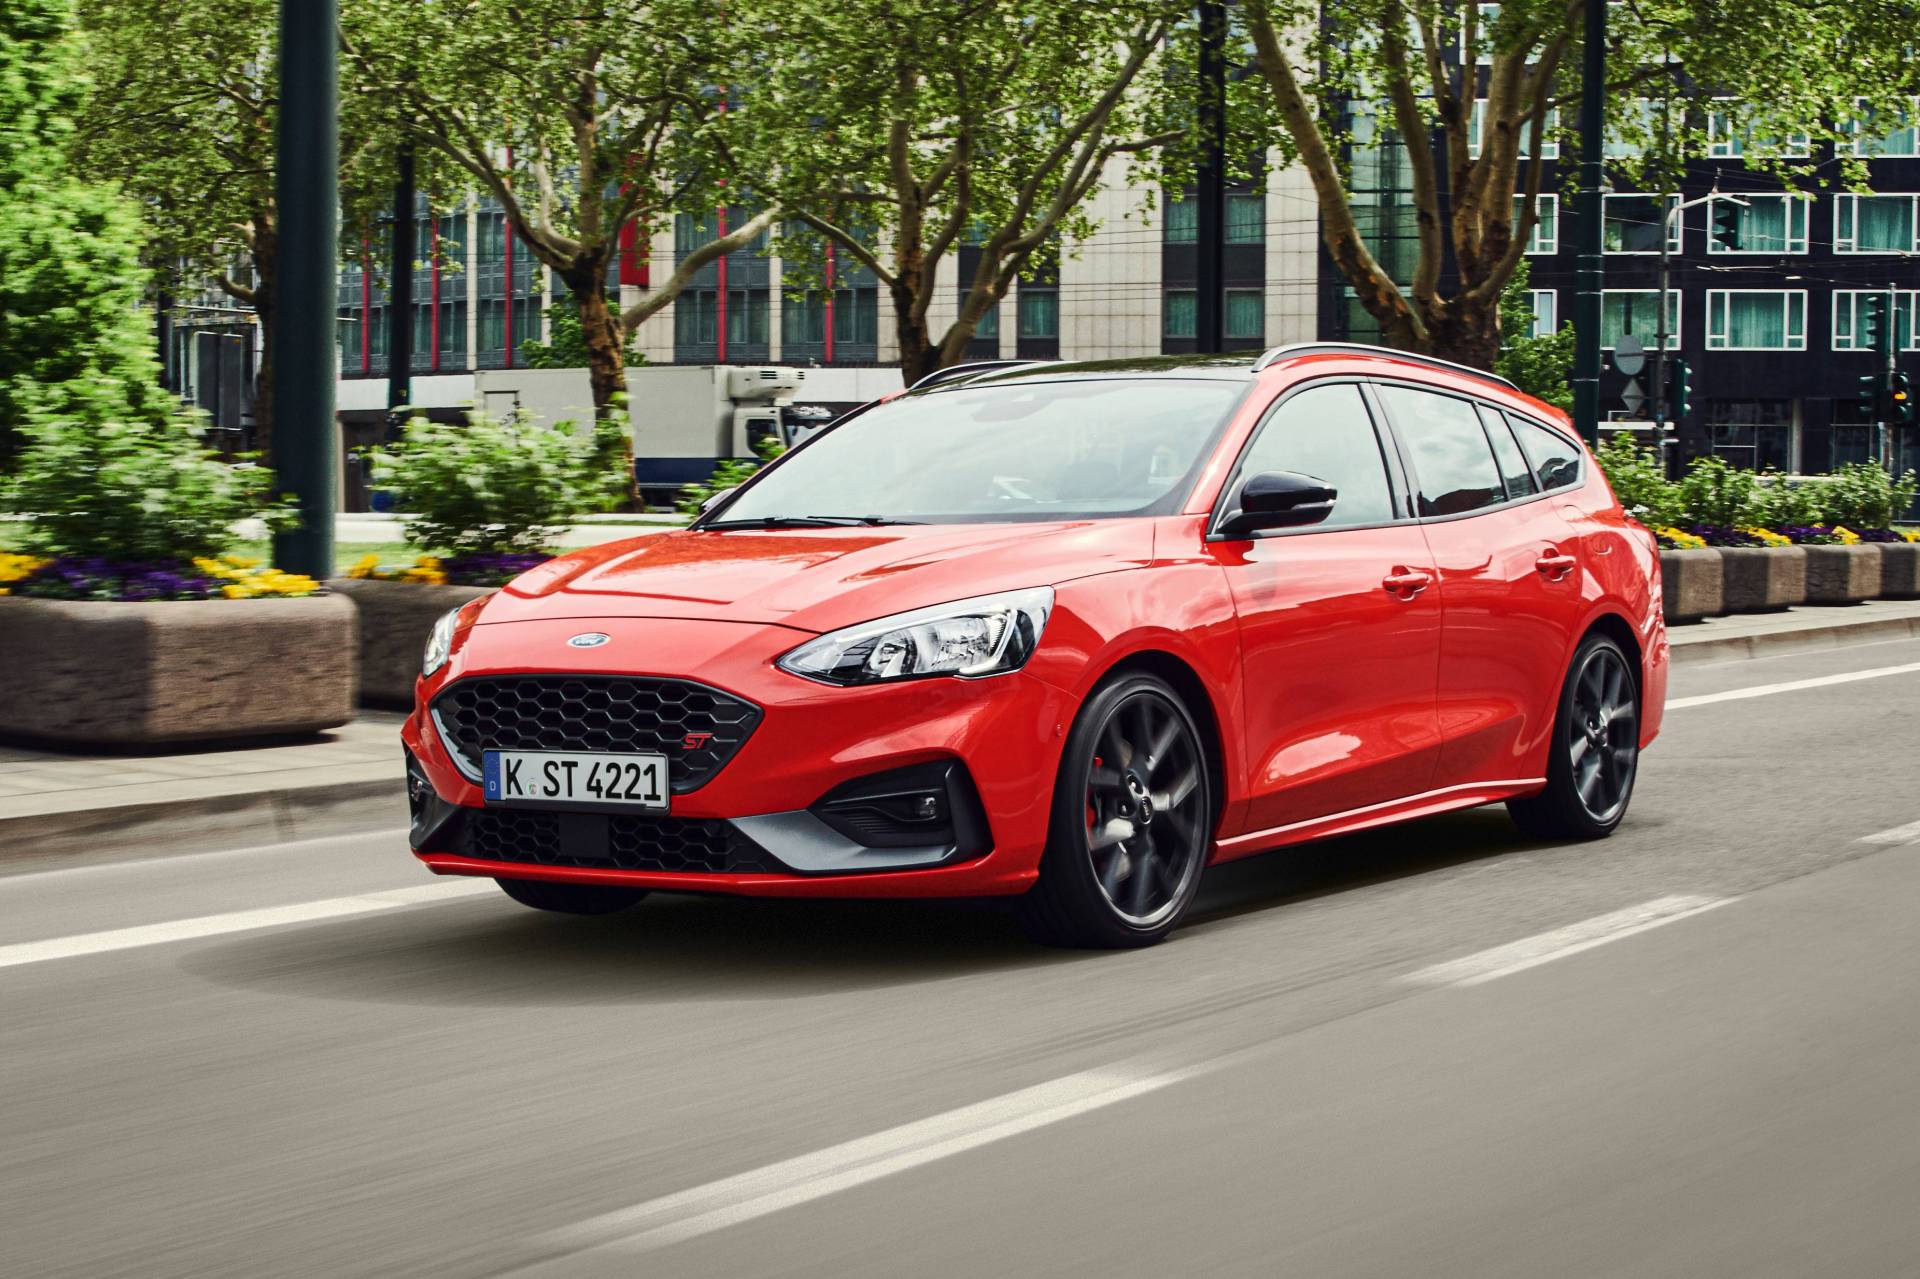 2019 Focus ST Wagon Revealed As The Family Man's Fast Ford Carscoops